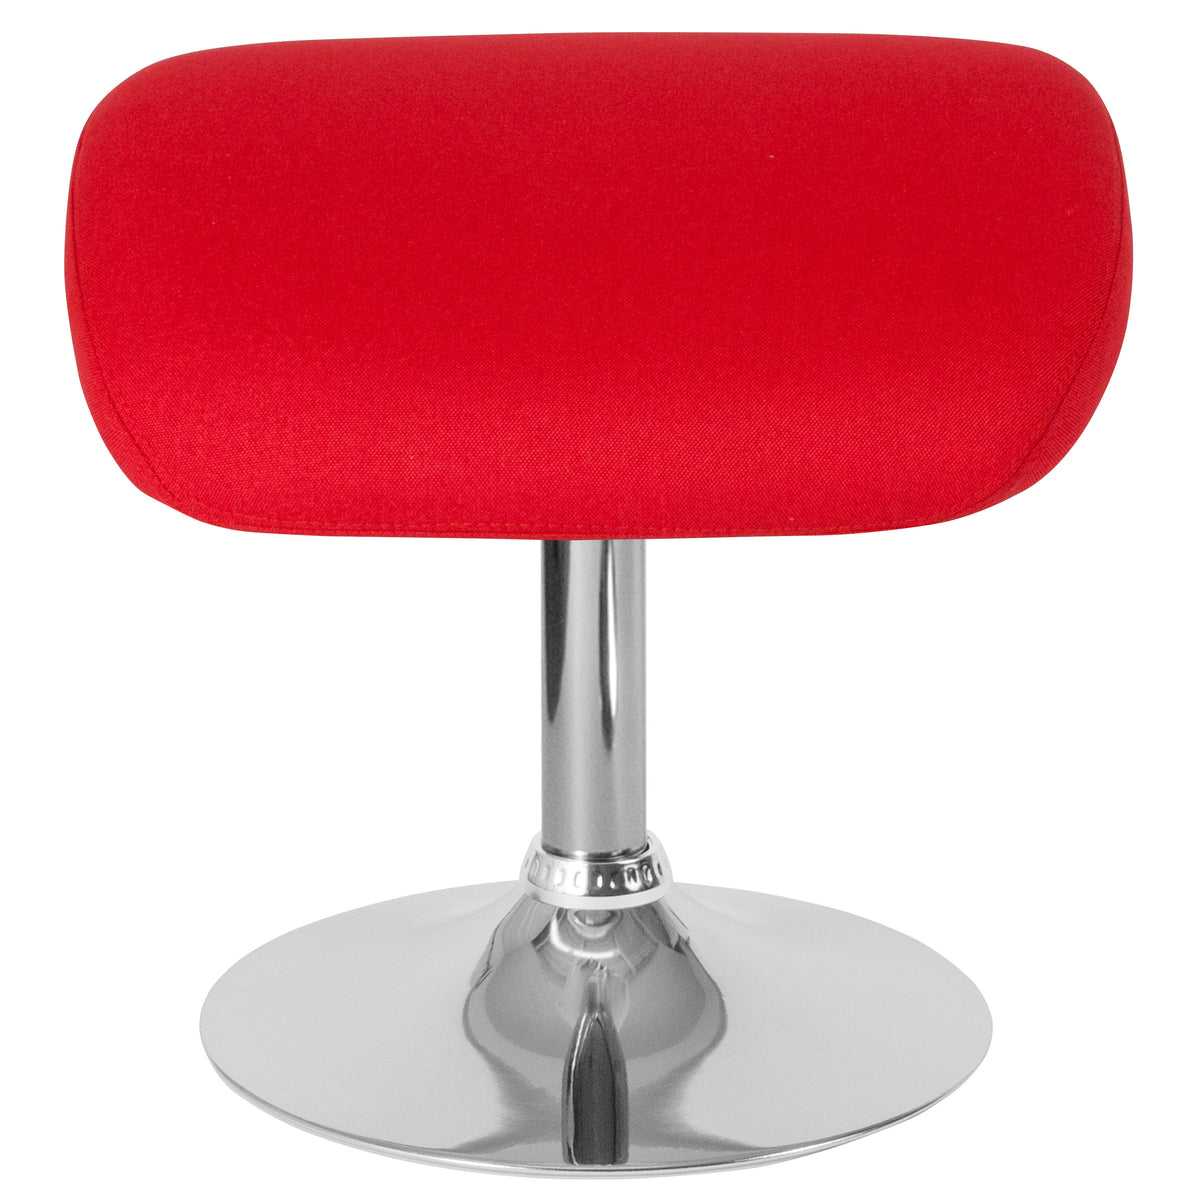 Red Fabric |#| Red Fabric Ottoman Footrest with Chrome Base - Living Room Furniture